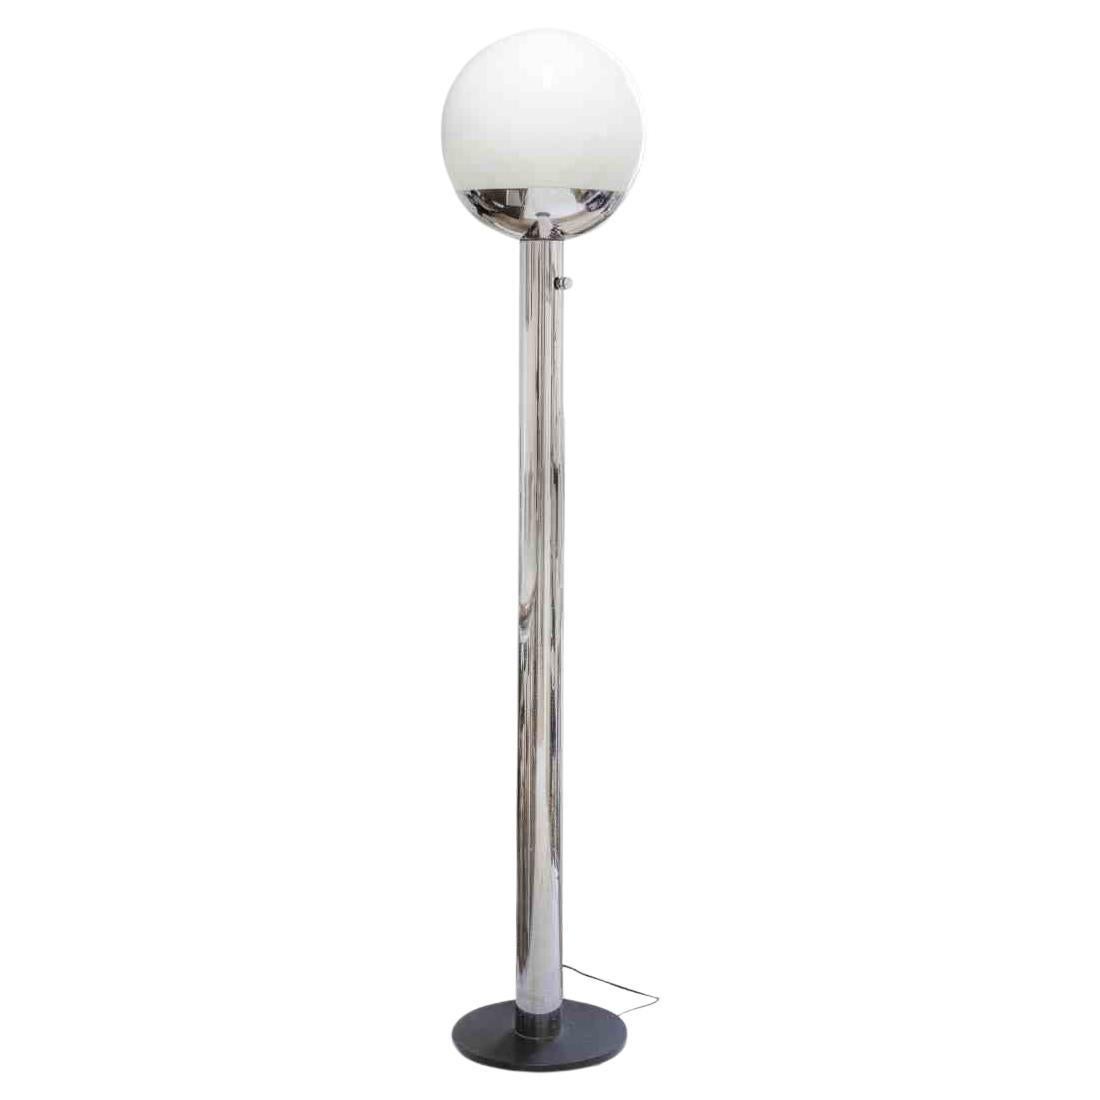 Vintage Floor Lamp P428 by Pia Guidetti Crippa, Mid-20th Century